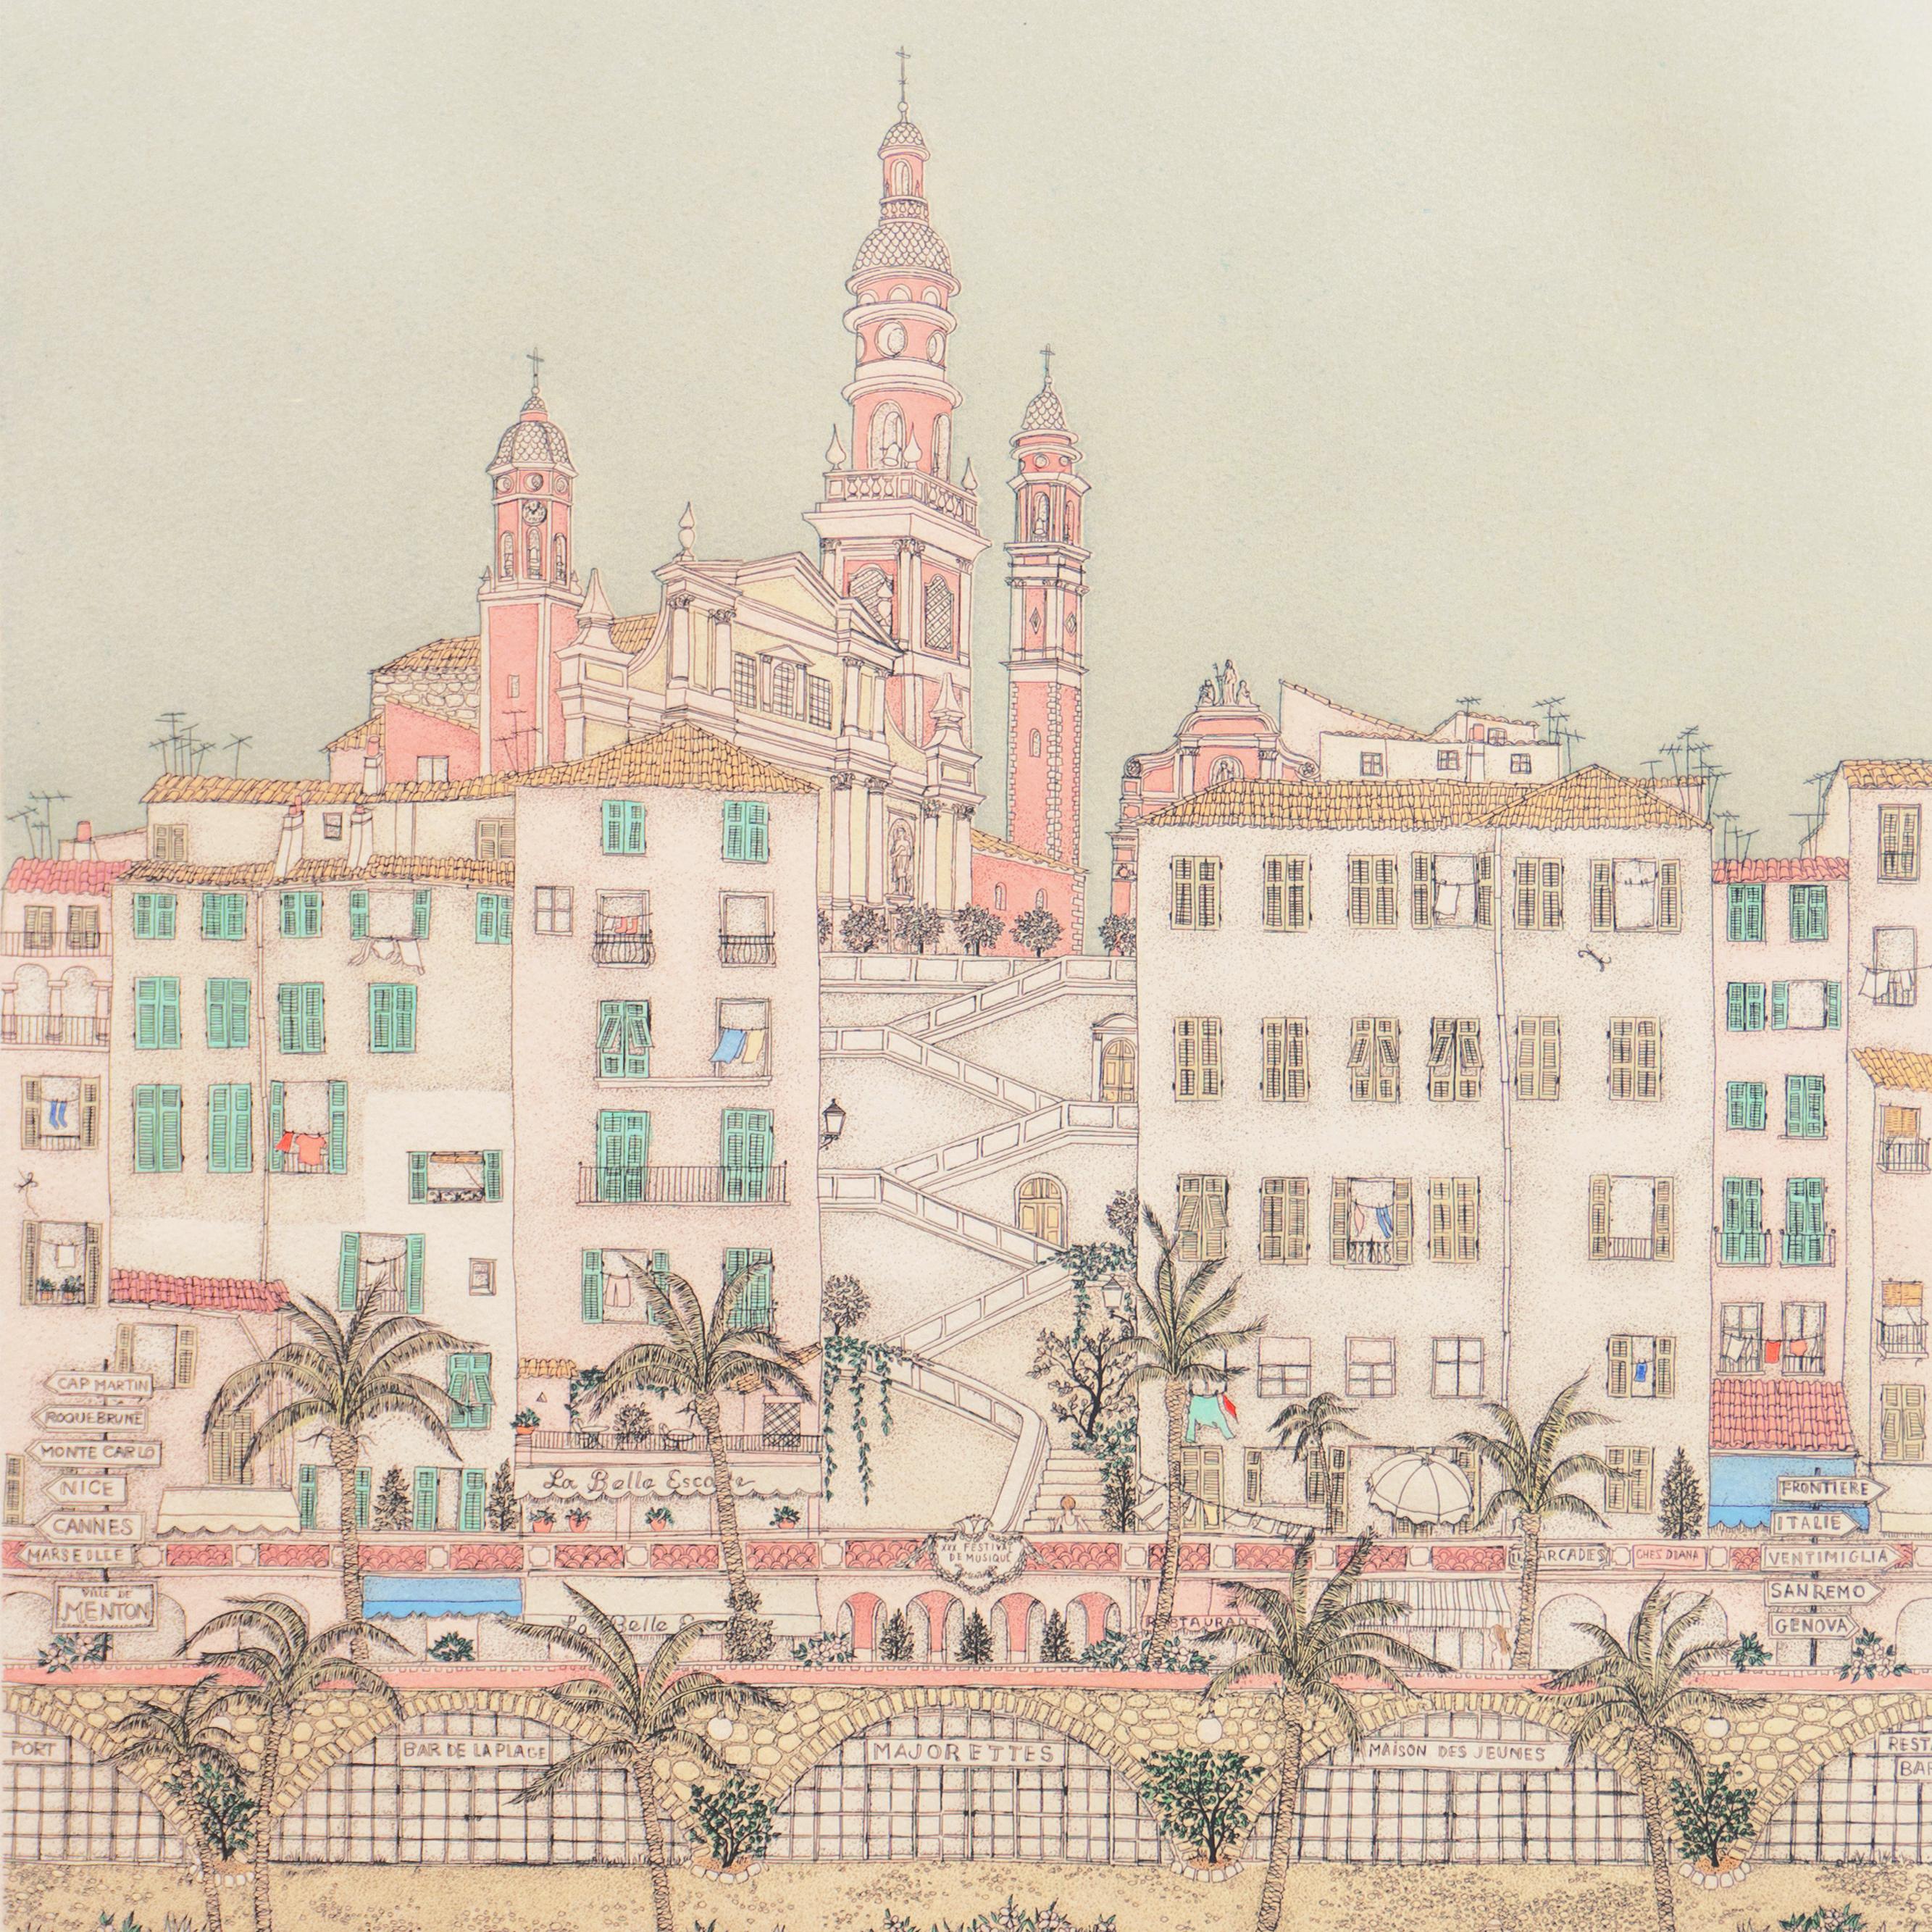 Signed, lower right, in pencil, 'Cuca Romley' (Spanish, born 1933), titled 'Plage de Menton' lower center and inscribed, lower left, with number and limitation, '77/175'. 

An elegant view of this famous resort town in the South of France with